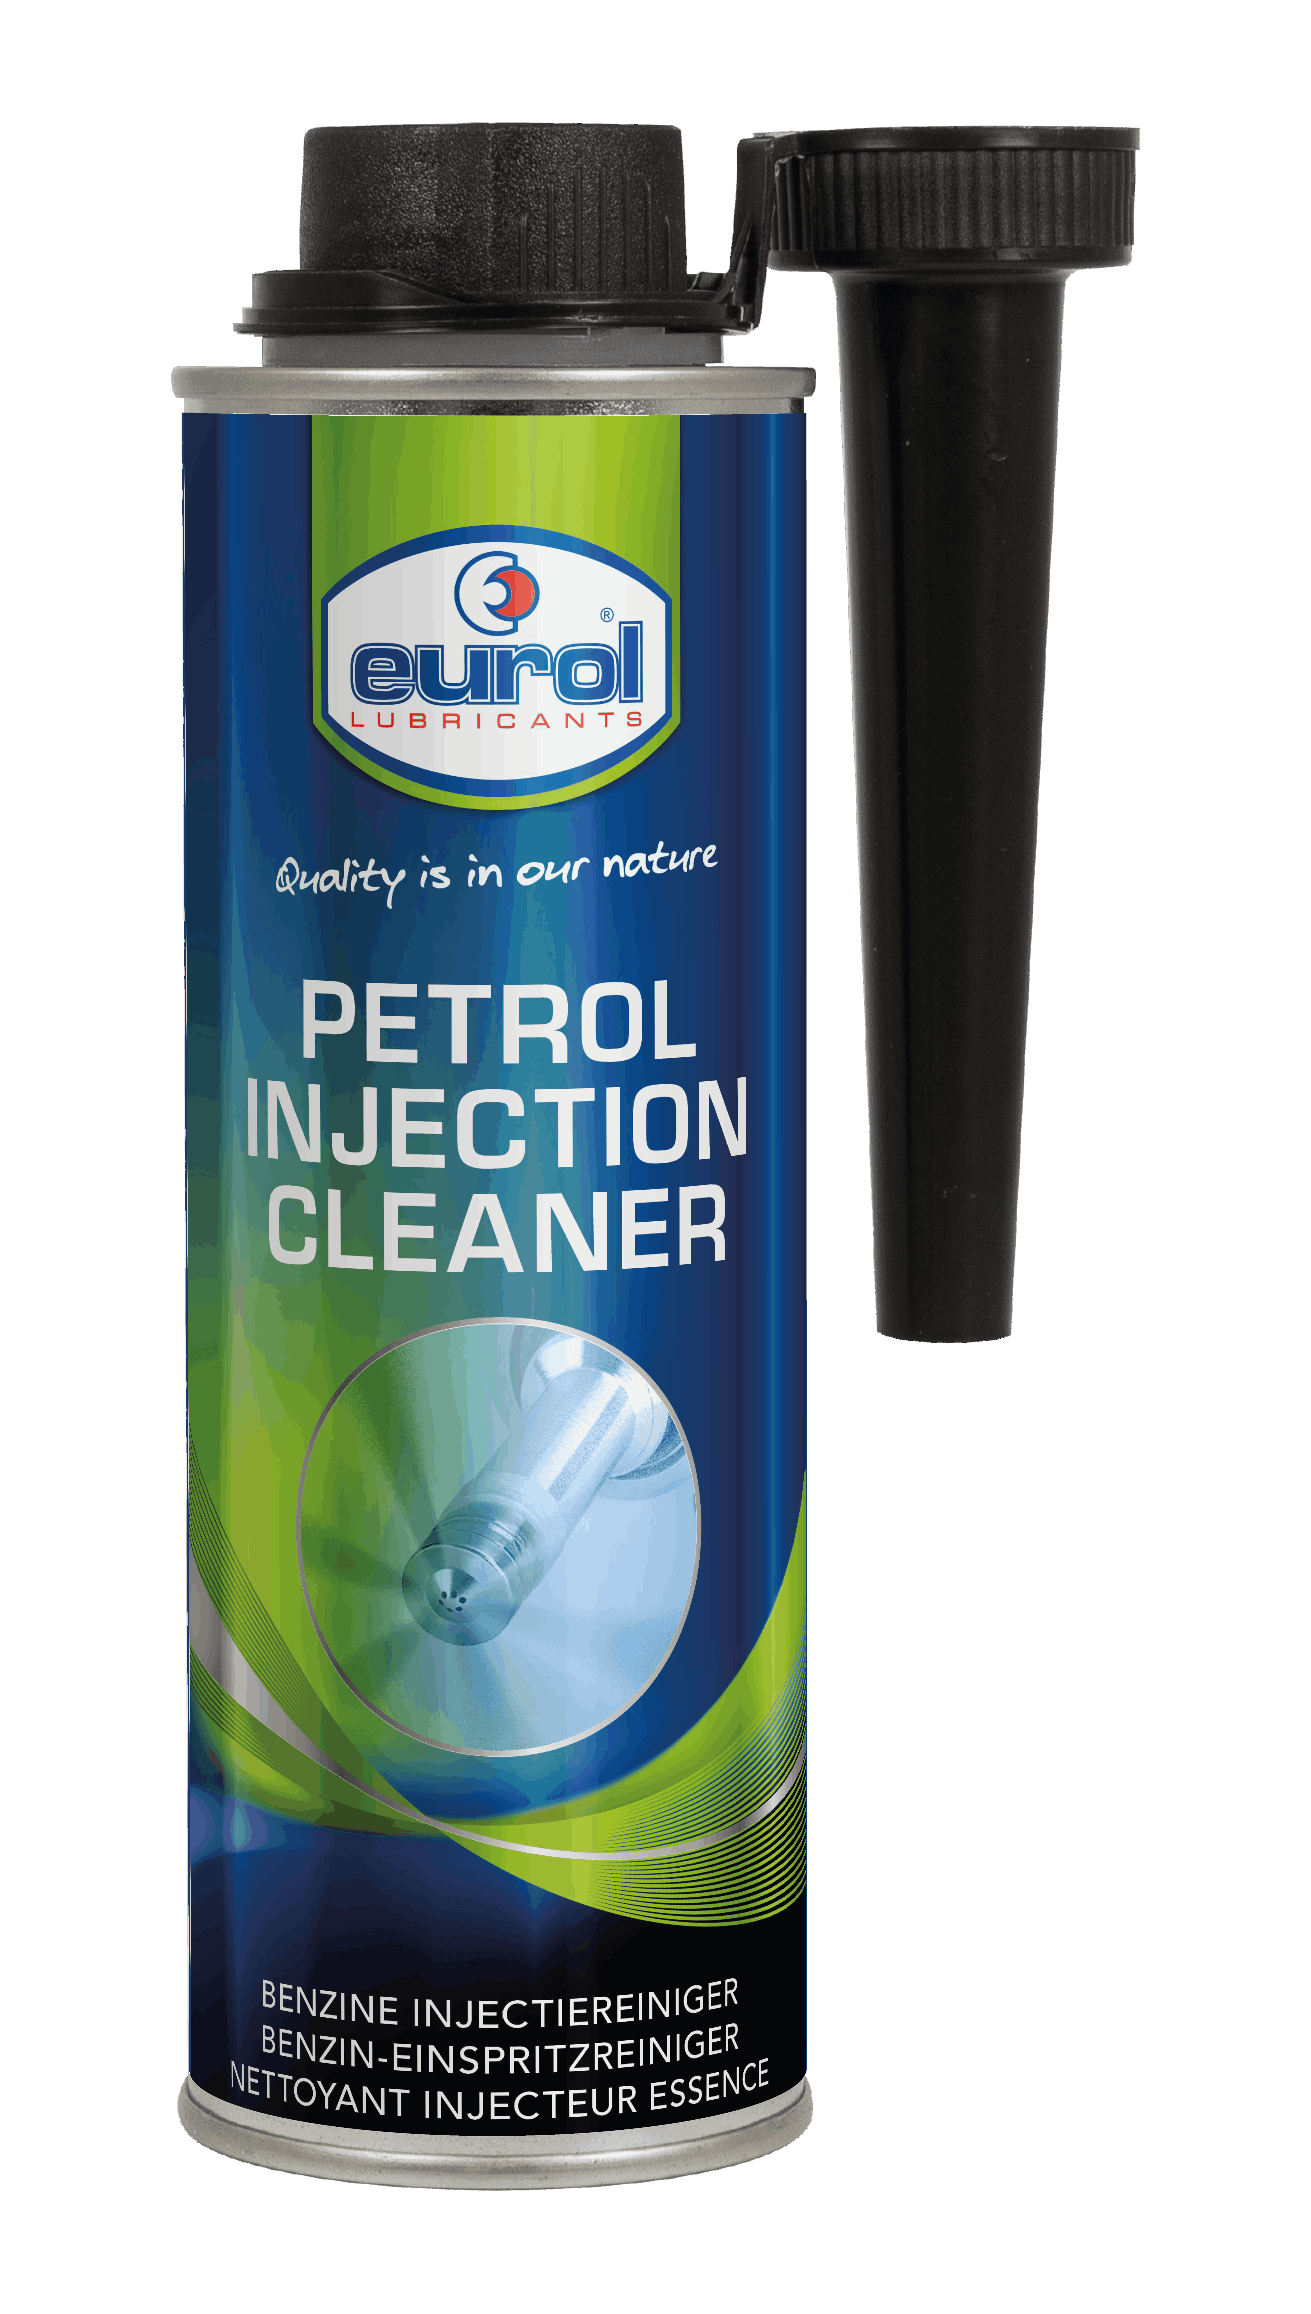 Petrol Injection Cleaner